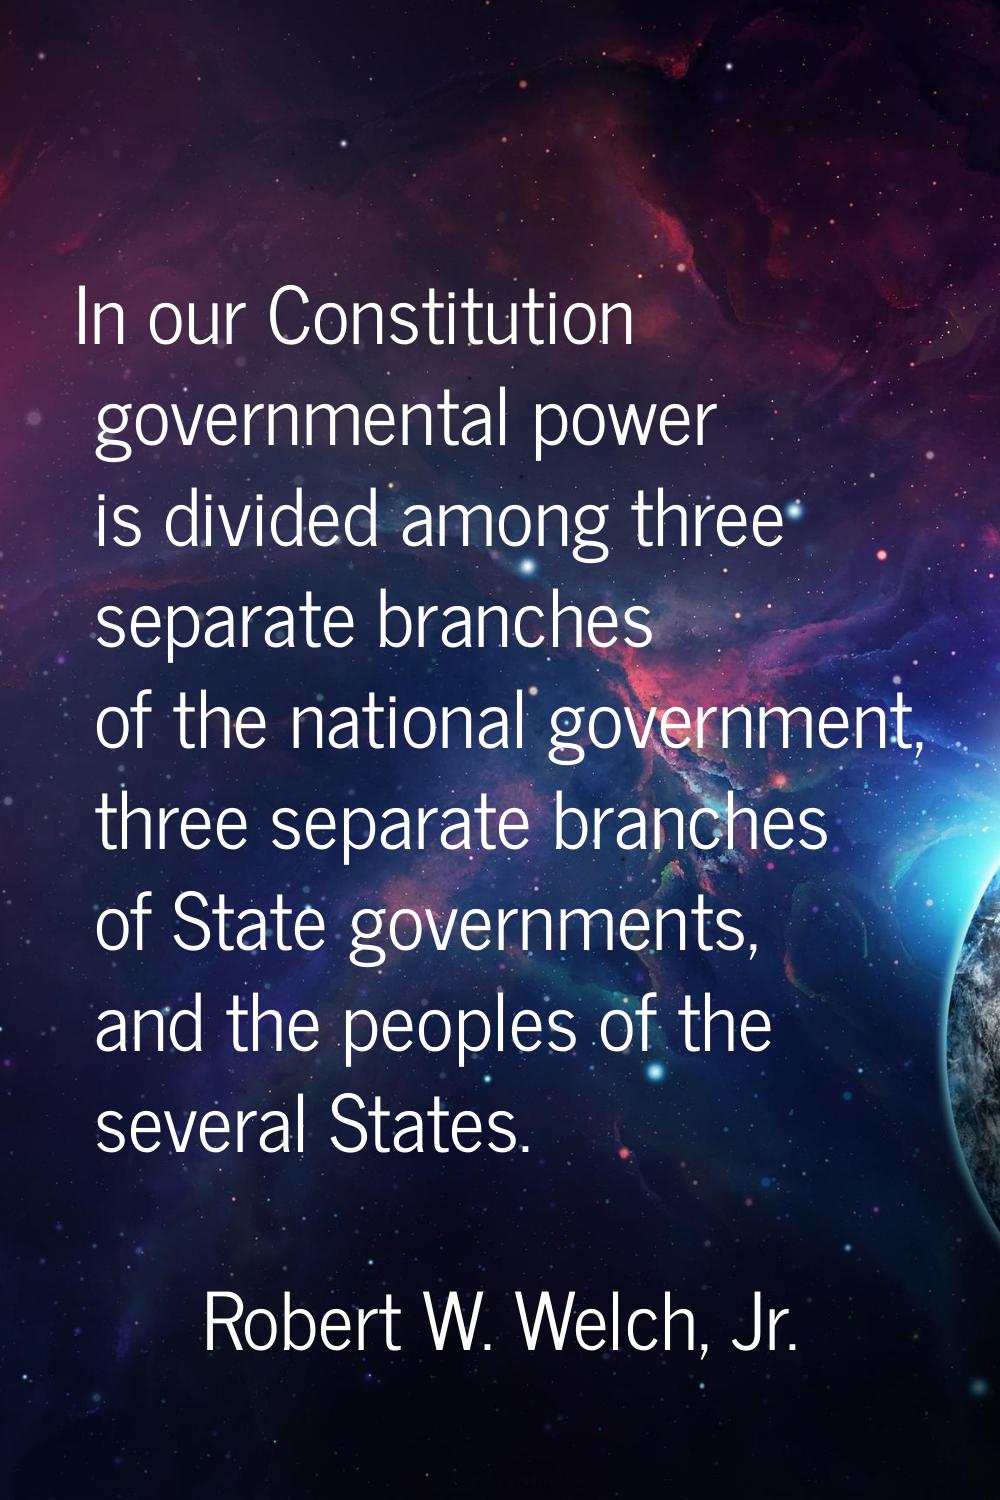 In our Constitution governmental power is divided among three separate branches of the national gov